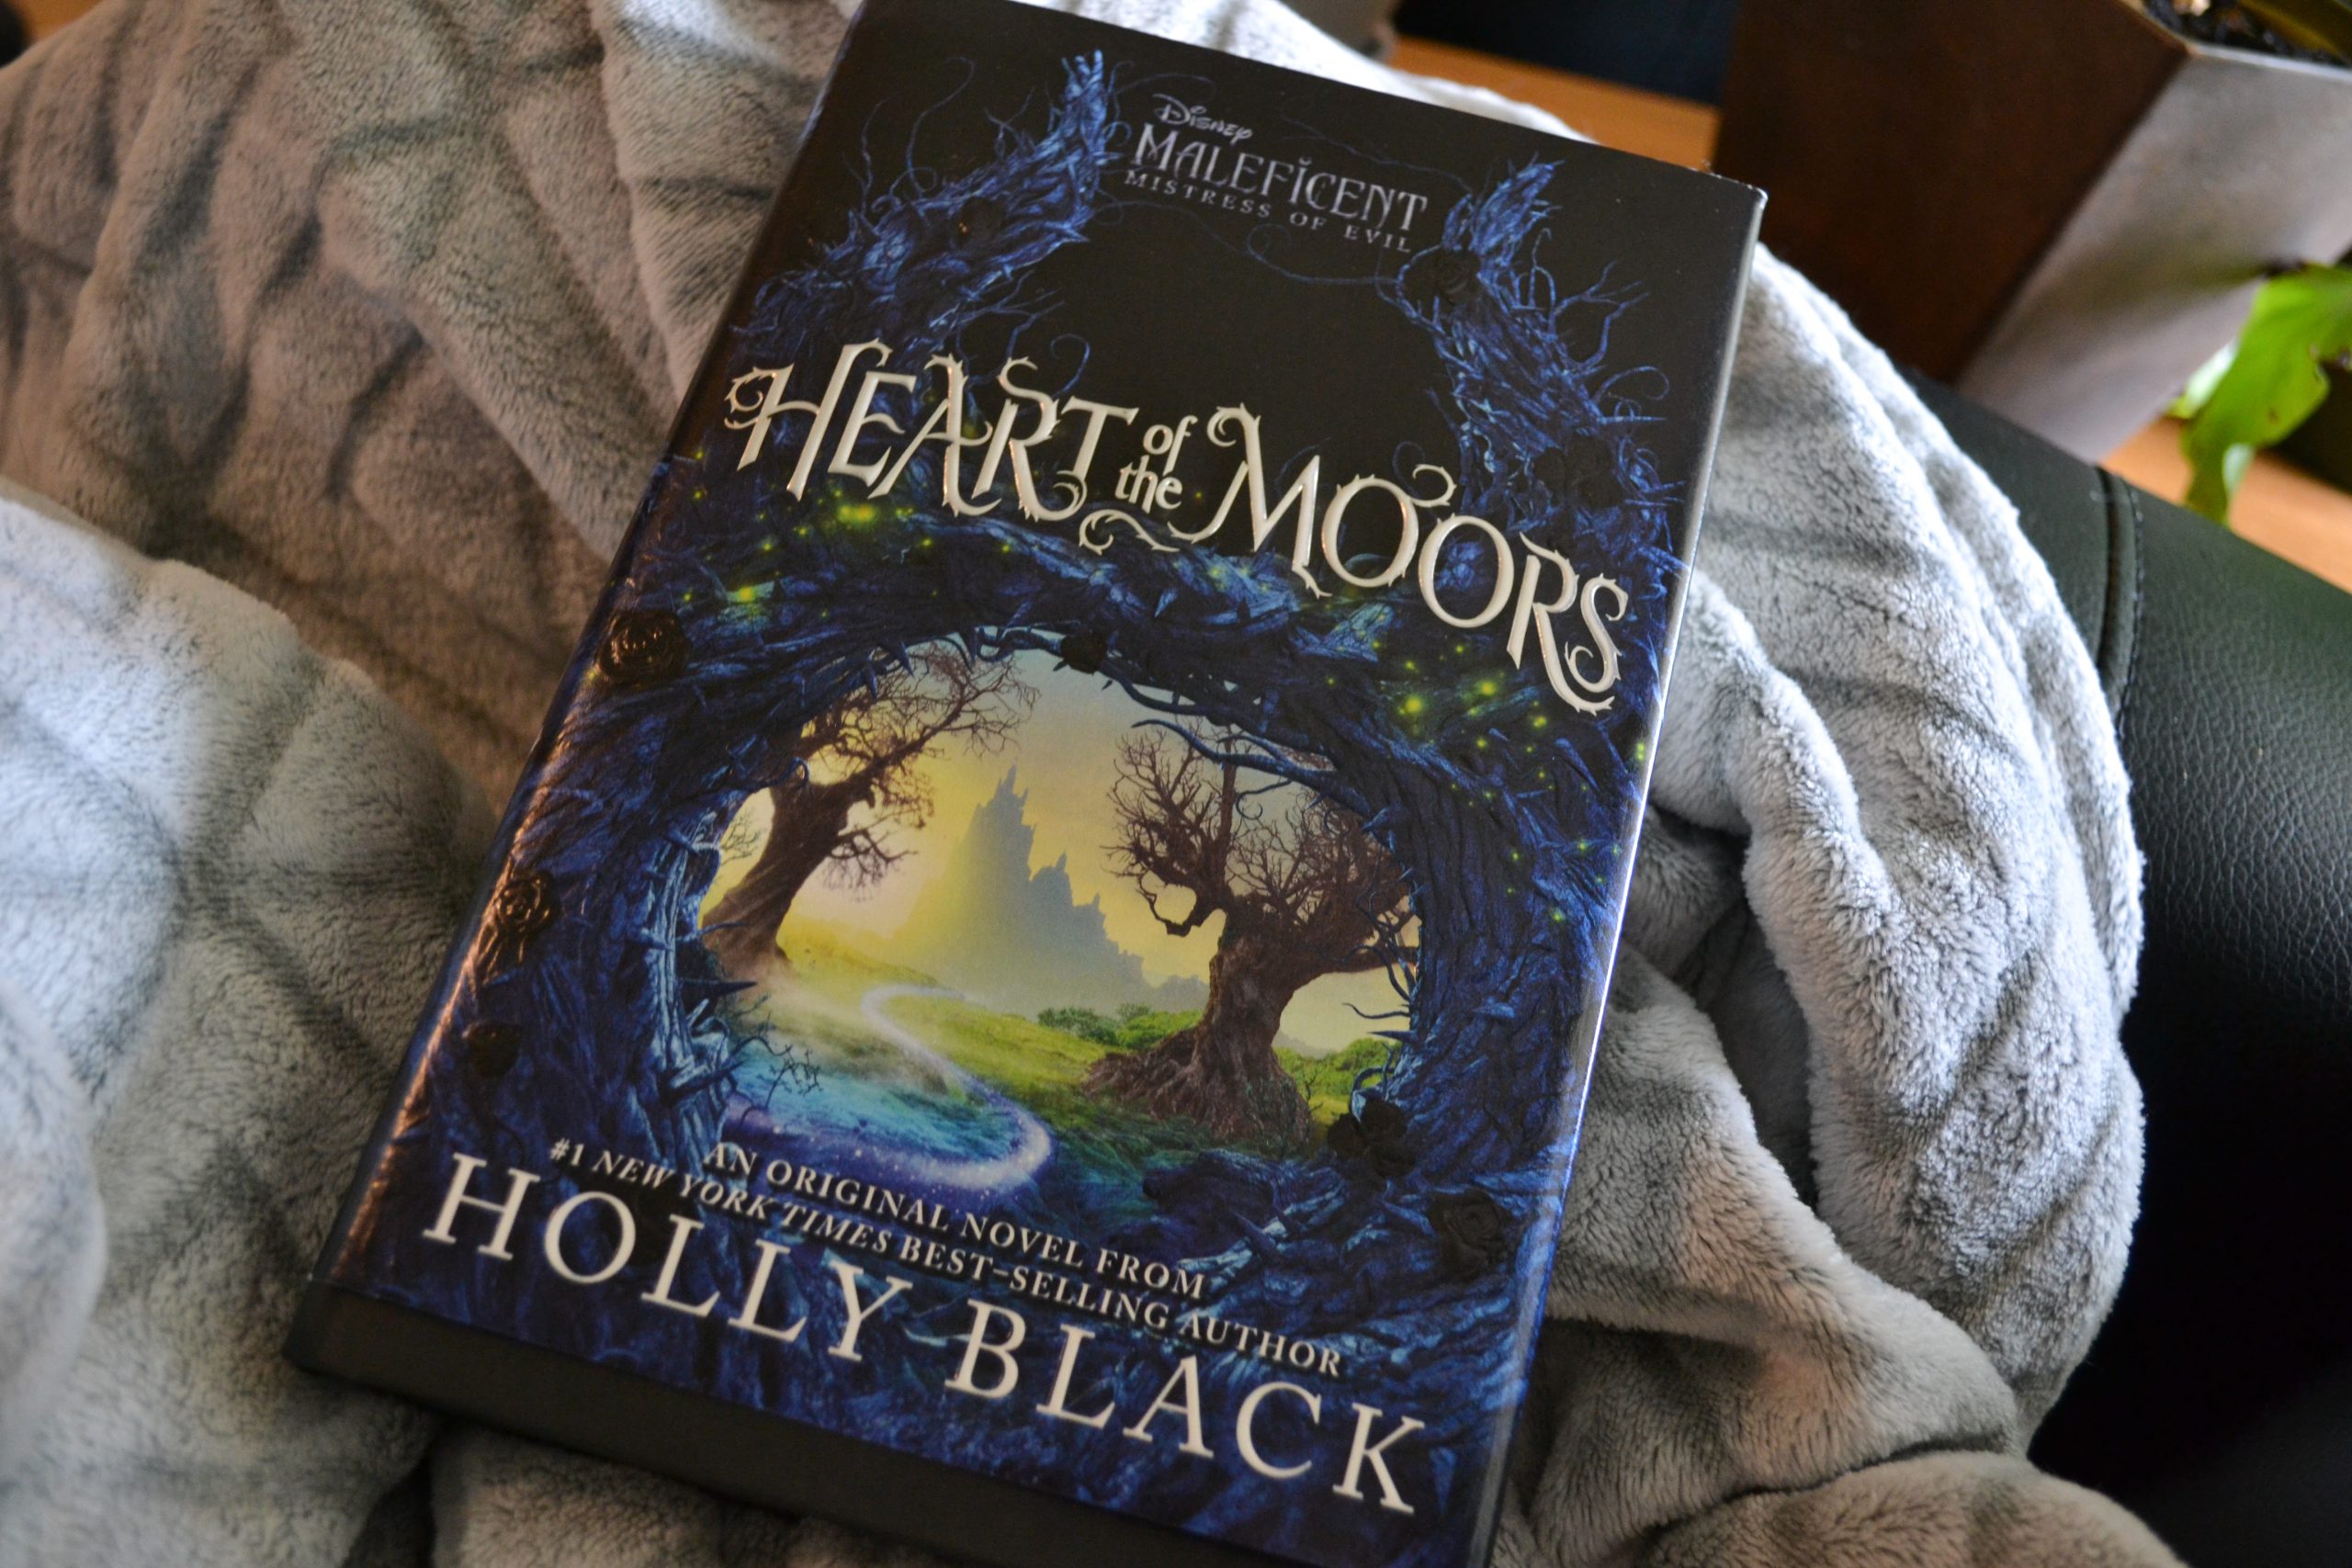 Holly Black’s Heart of the Moors #giveaway